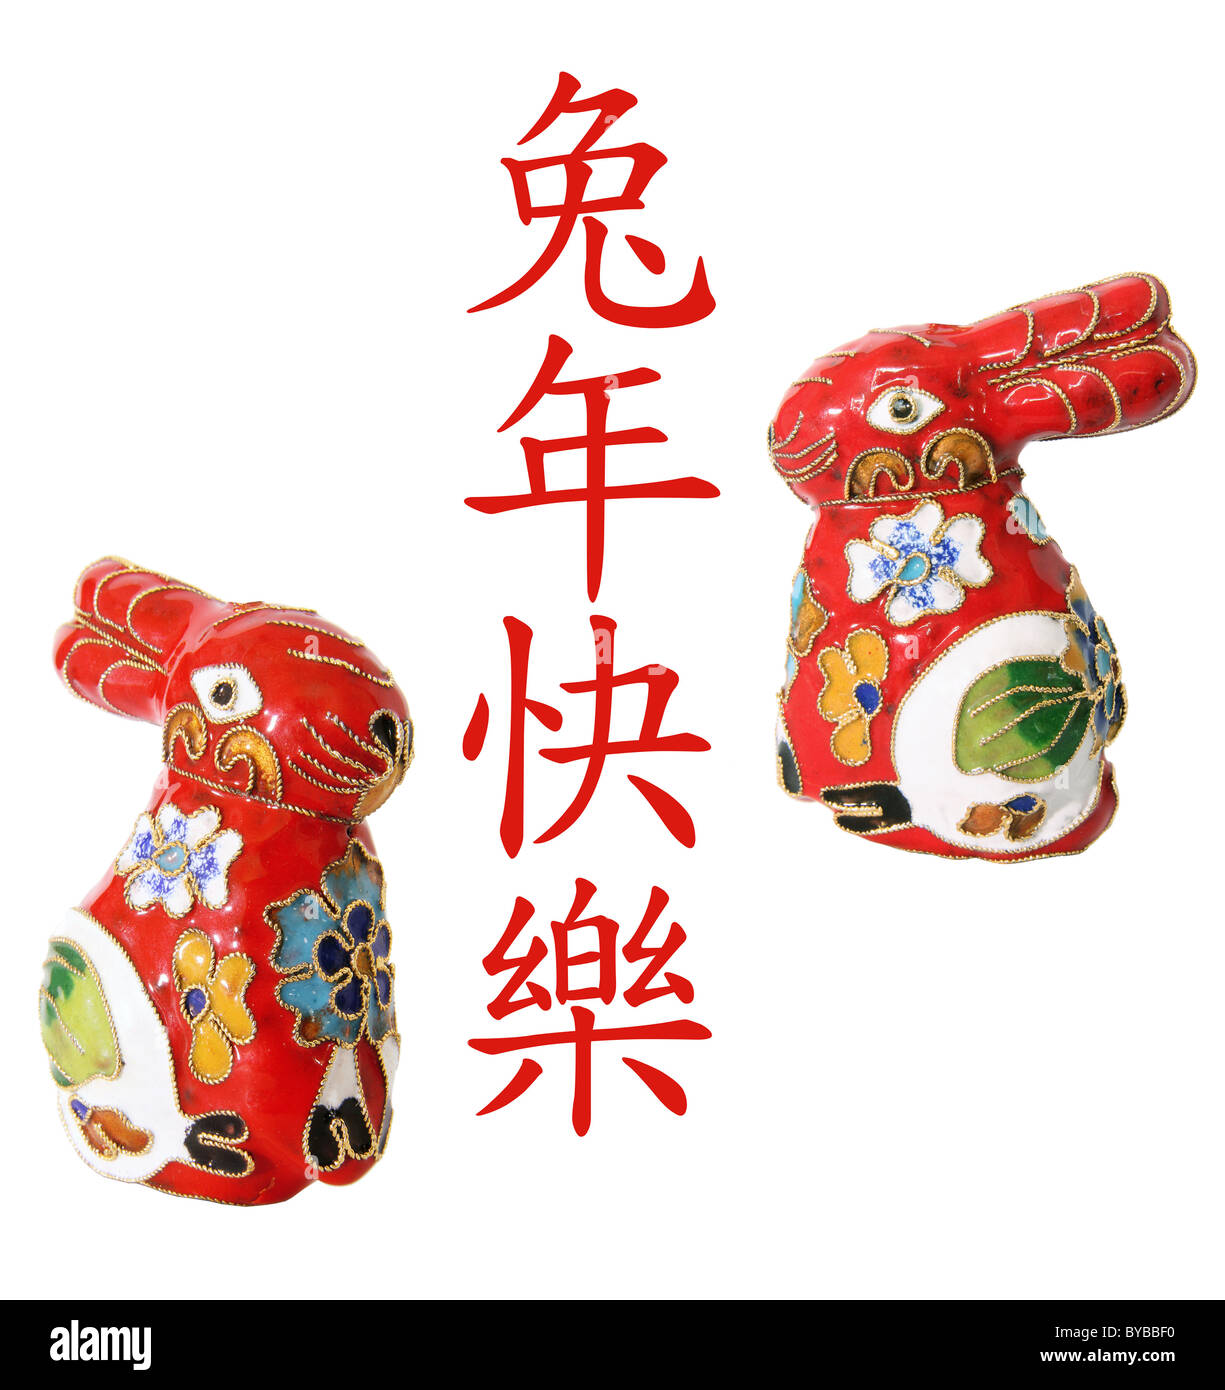 Year of the Rabbit on White Background Stock Photo